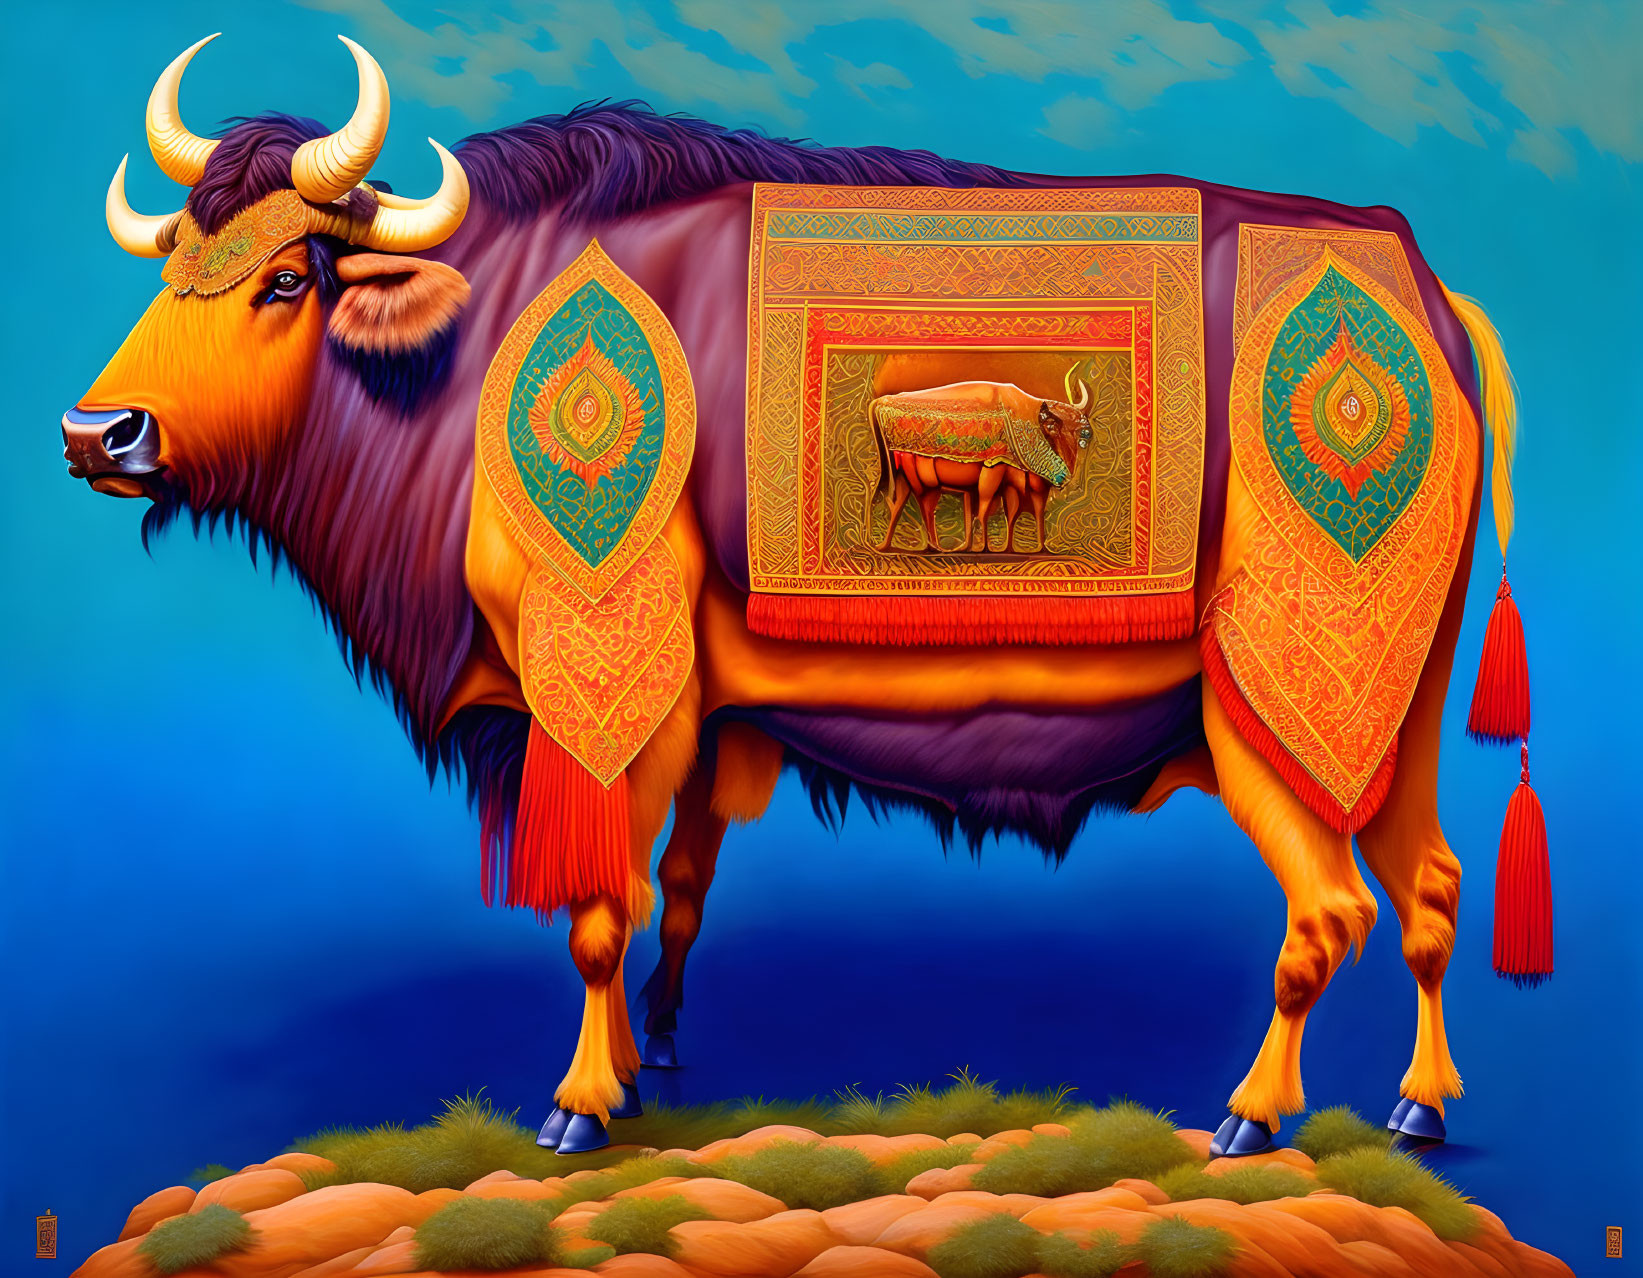 Colorful Bull Illustration with Ornate Patterns and Detailed Blanket